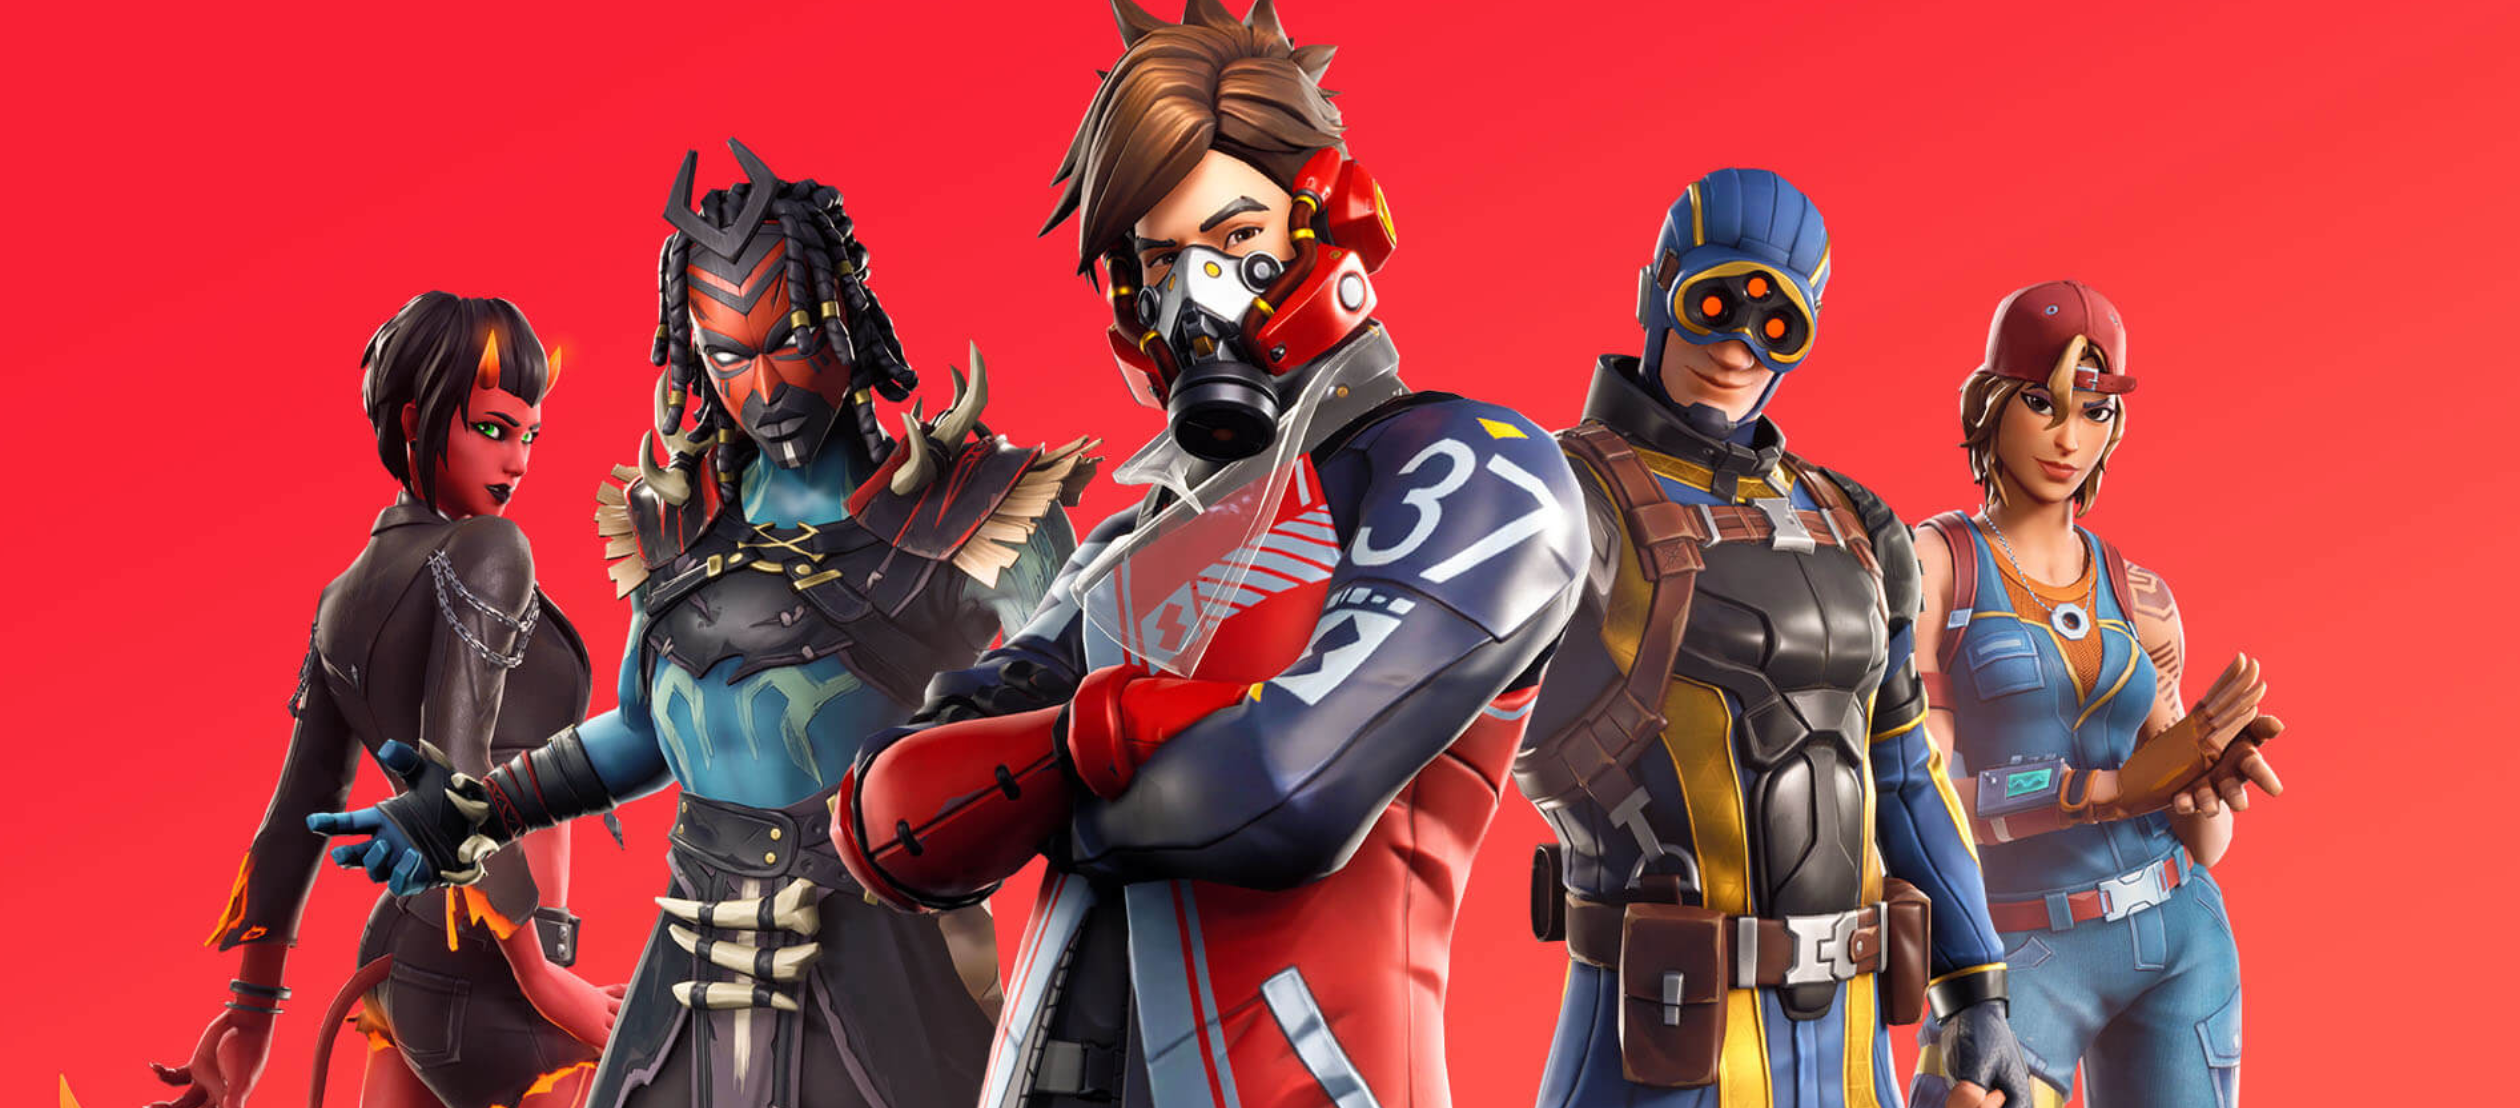 After Player Outcry, Fortnite Reverts Turbo Building Changes